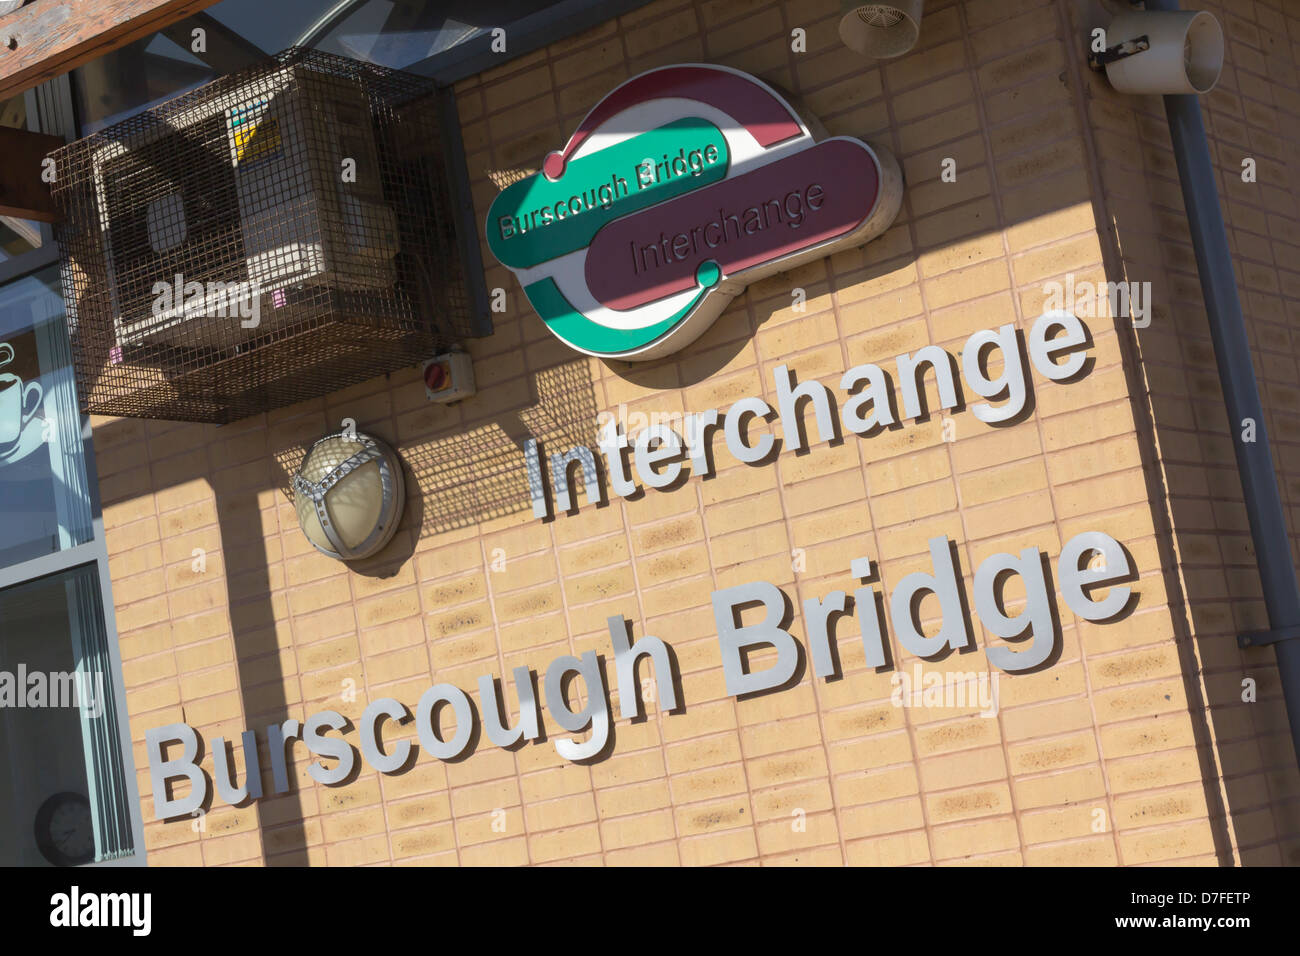 Burscough Bridge bus/railway interchange, a new building with shop and cafe  reflecting the station's importance to commuters. Stock Photo